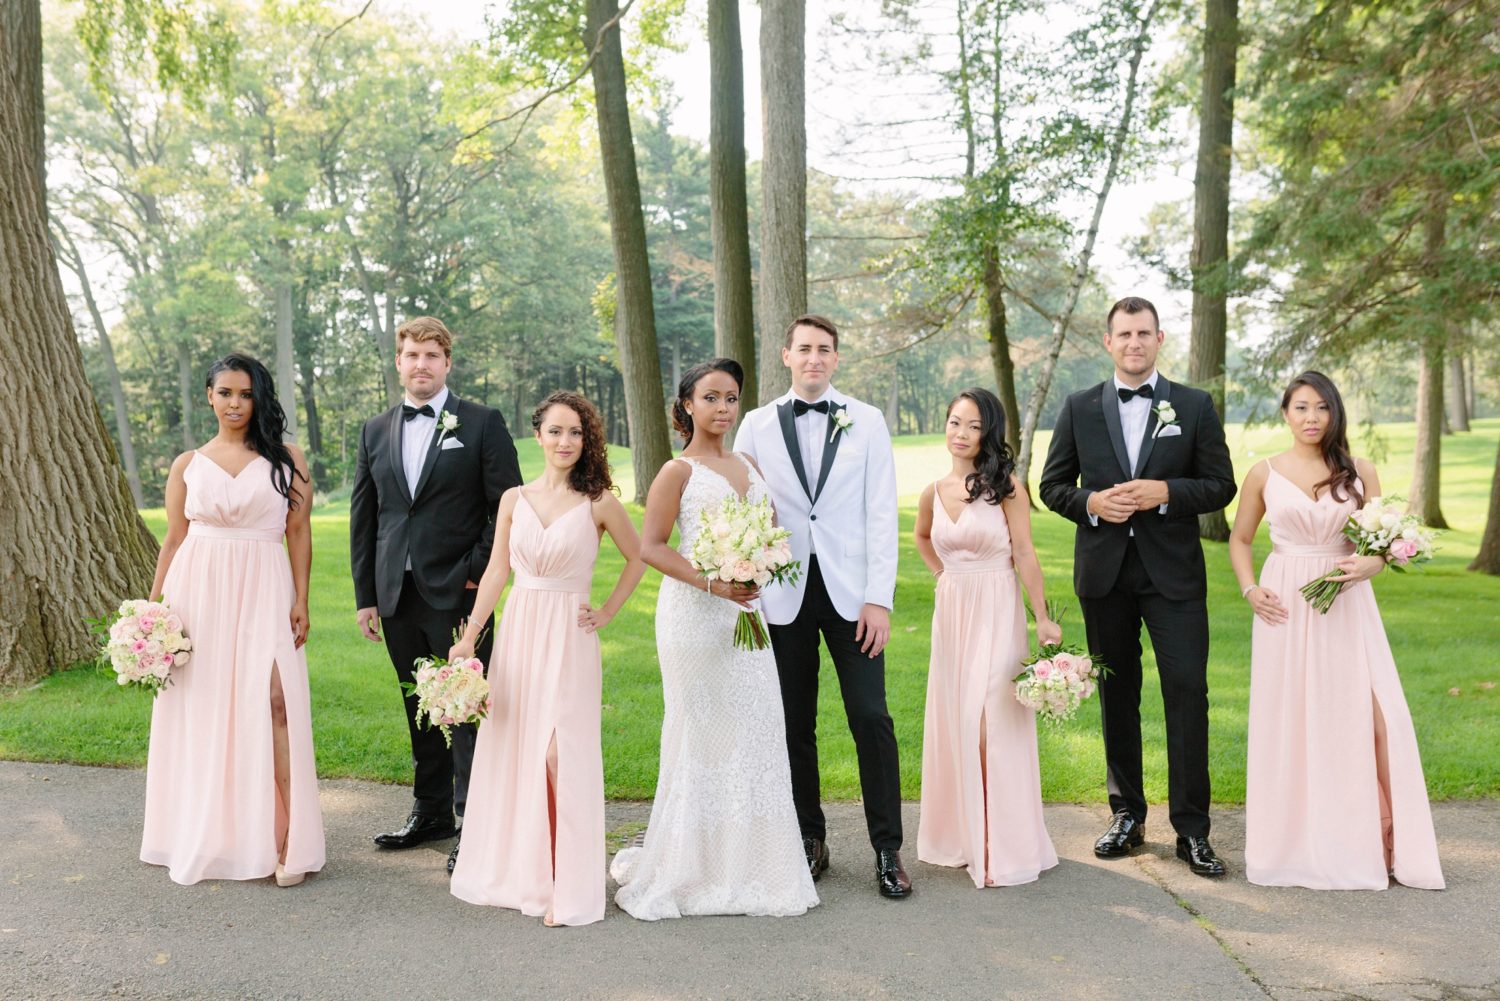 Uneven number of groomsmen and bridemaids. Black tie wedding with pink and white dresses